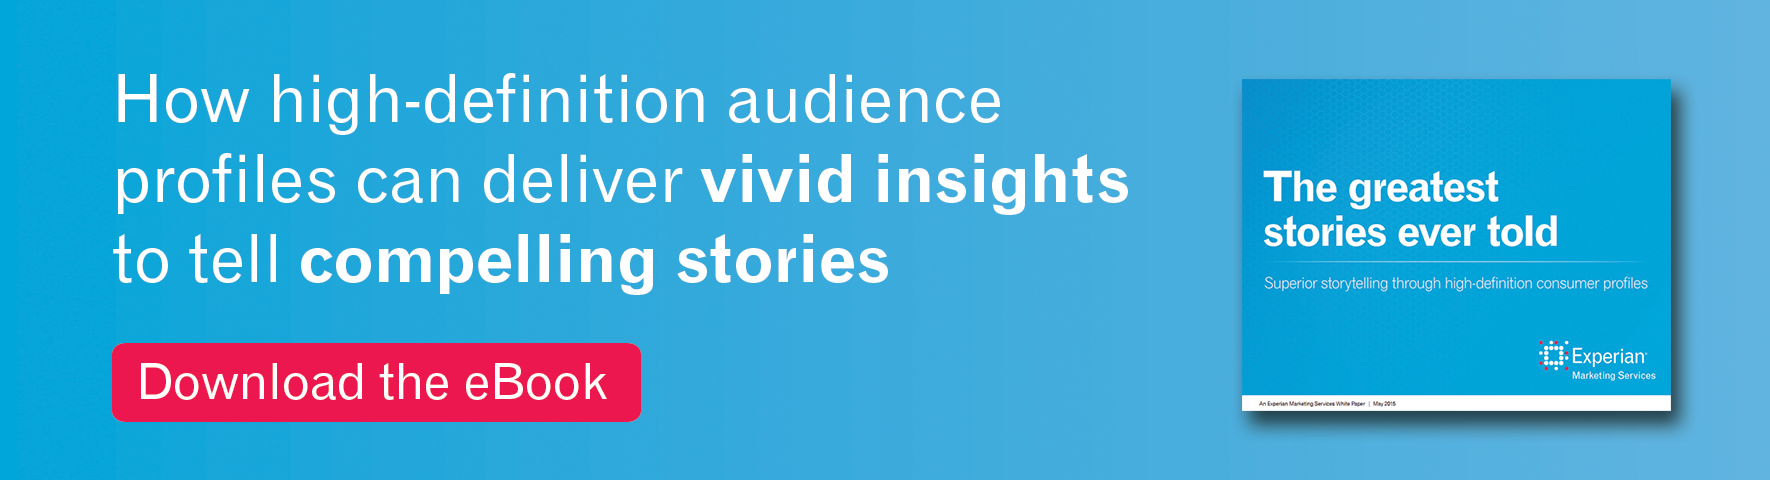 Download the eBook to create engaging brand stories